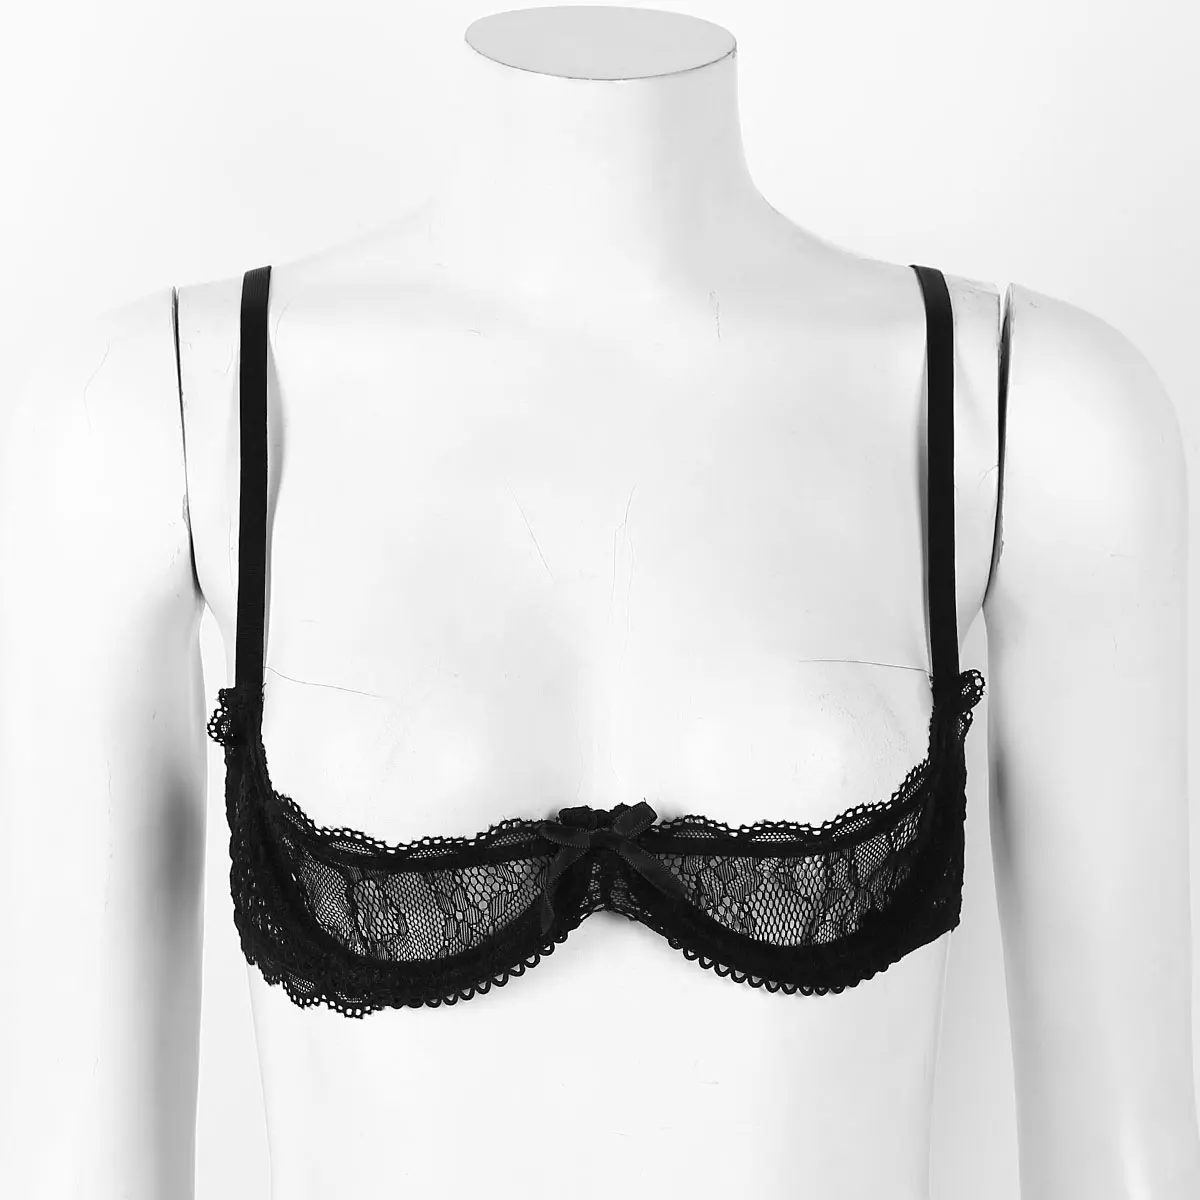 YIZYIF Womens Bowknot Underwired Bra Strappy Open Cup Patent